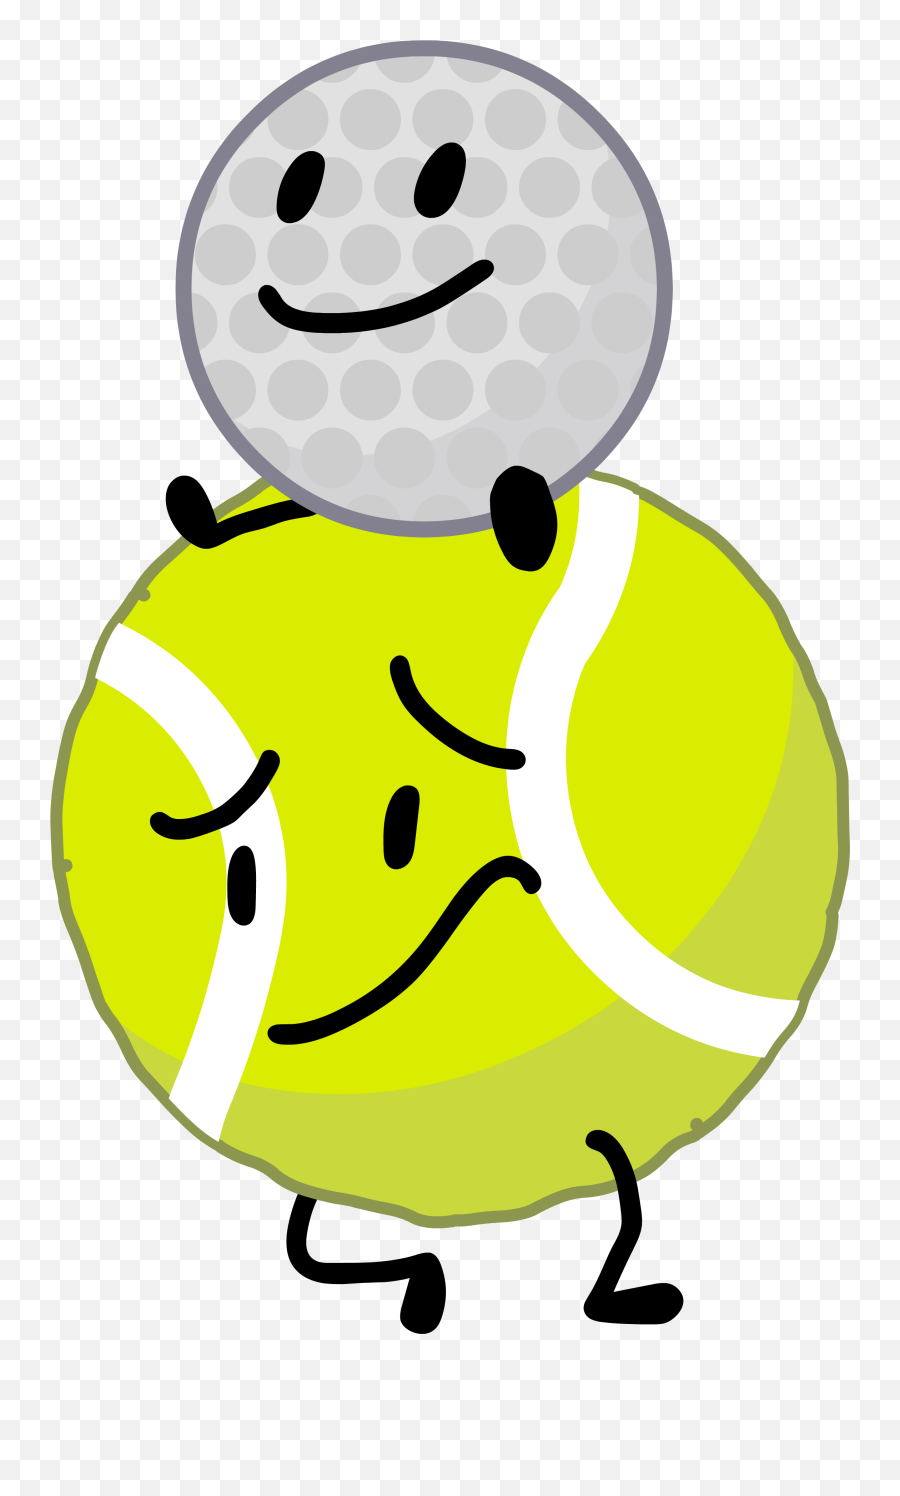 Golf Ball And Tennis Ball - Bfb Tennis Ball Gallery Emoji,Emotion Bubbles In Everybody's Golf